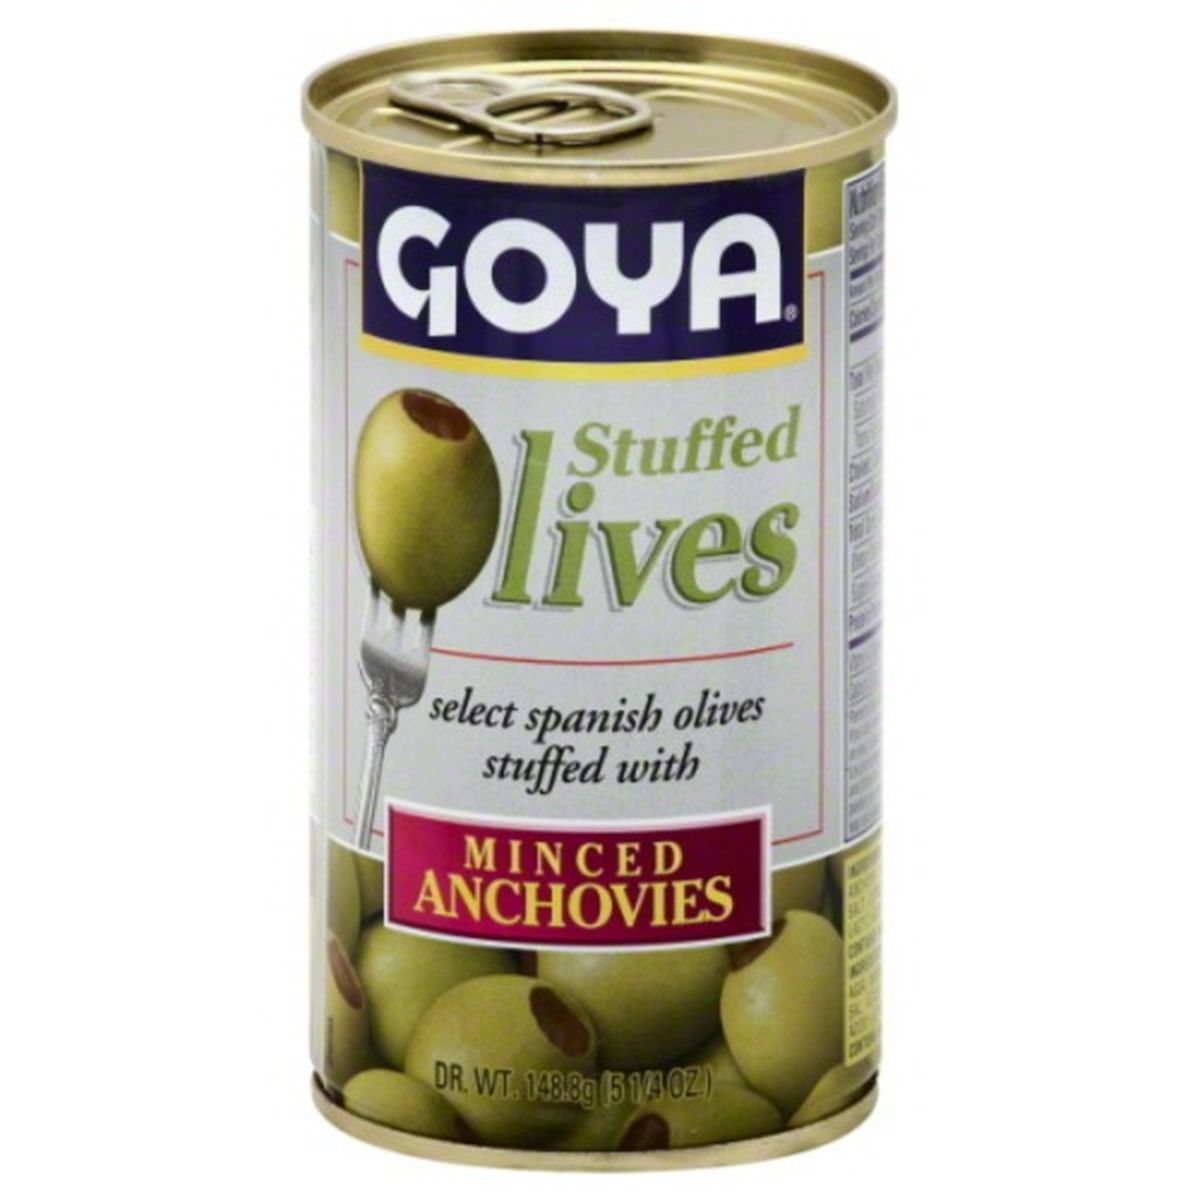 Calories in Goya Olives, Stuffed, Minced Anchovies